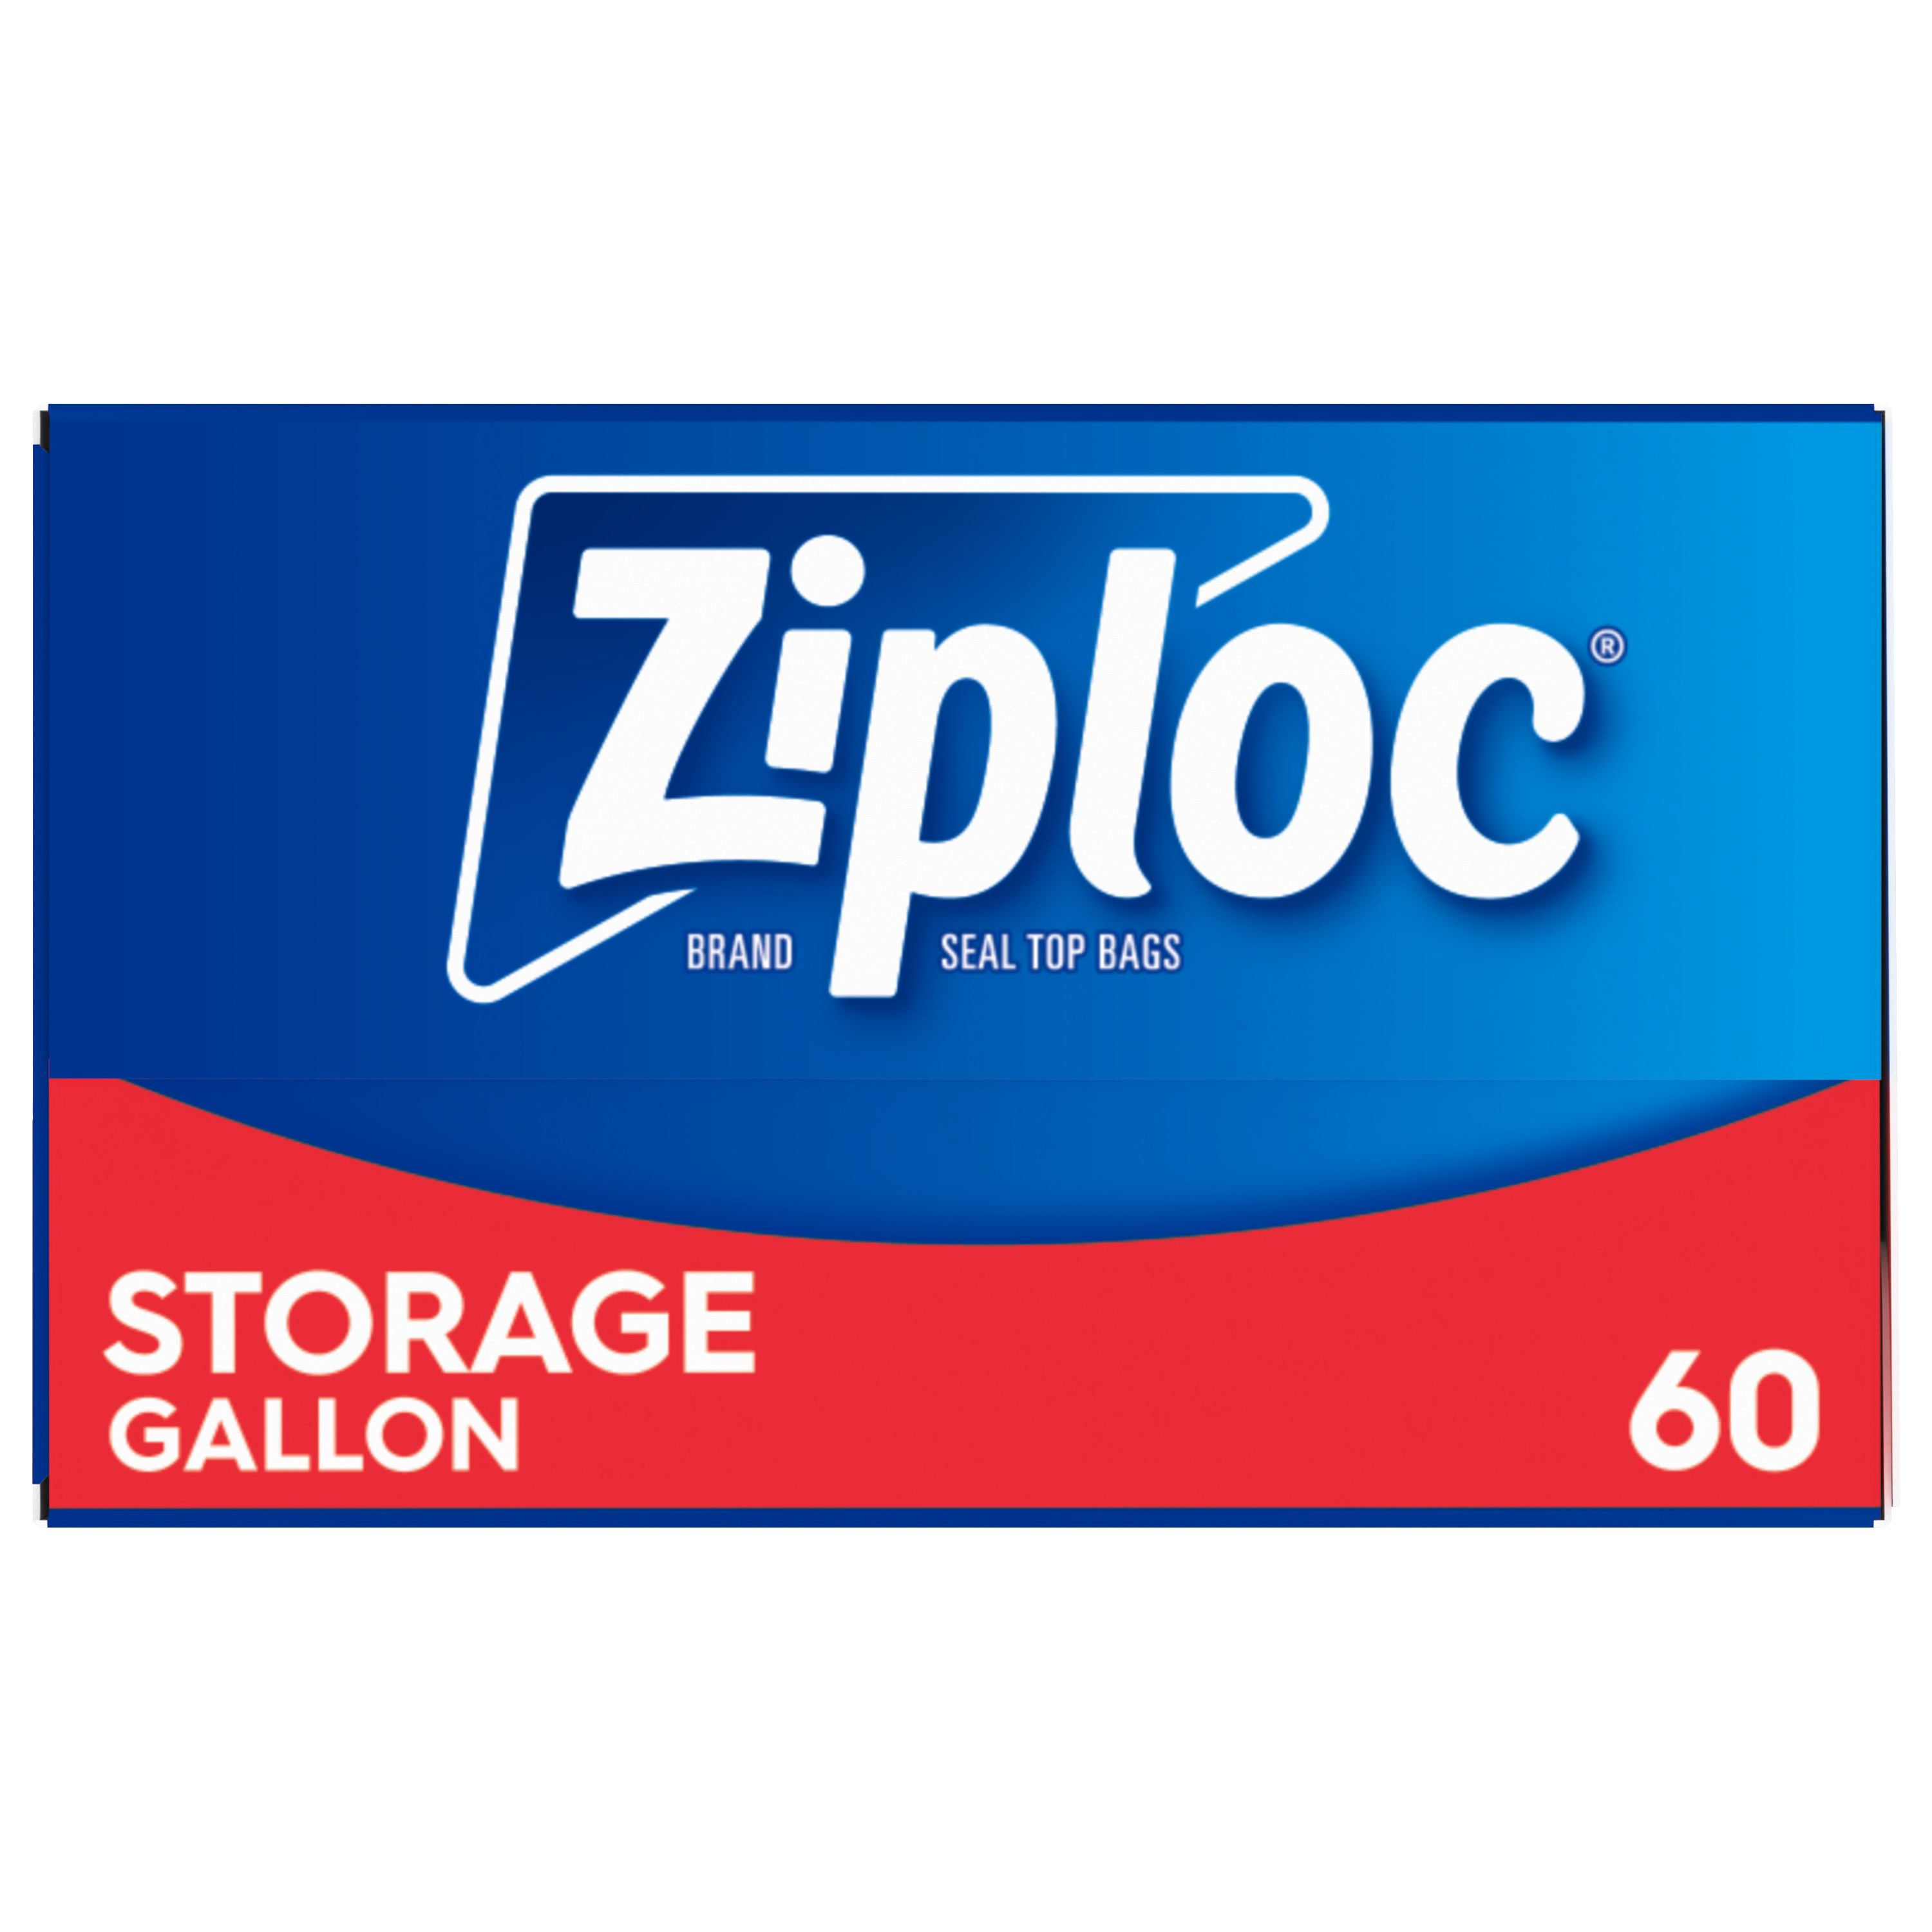 Ziploc® Brand Gallon Storage Bags with Stay Open Technology, 60 Count - image 17 of 19